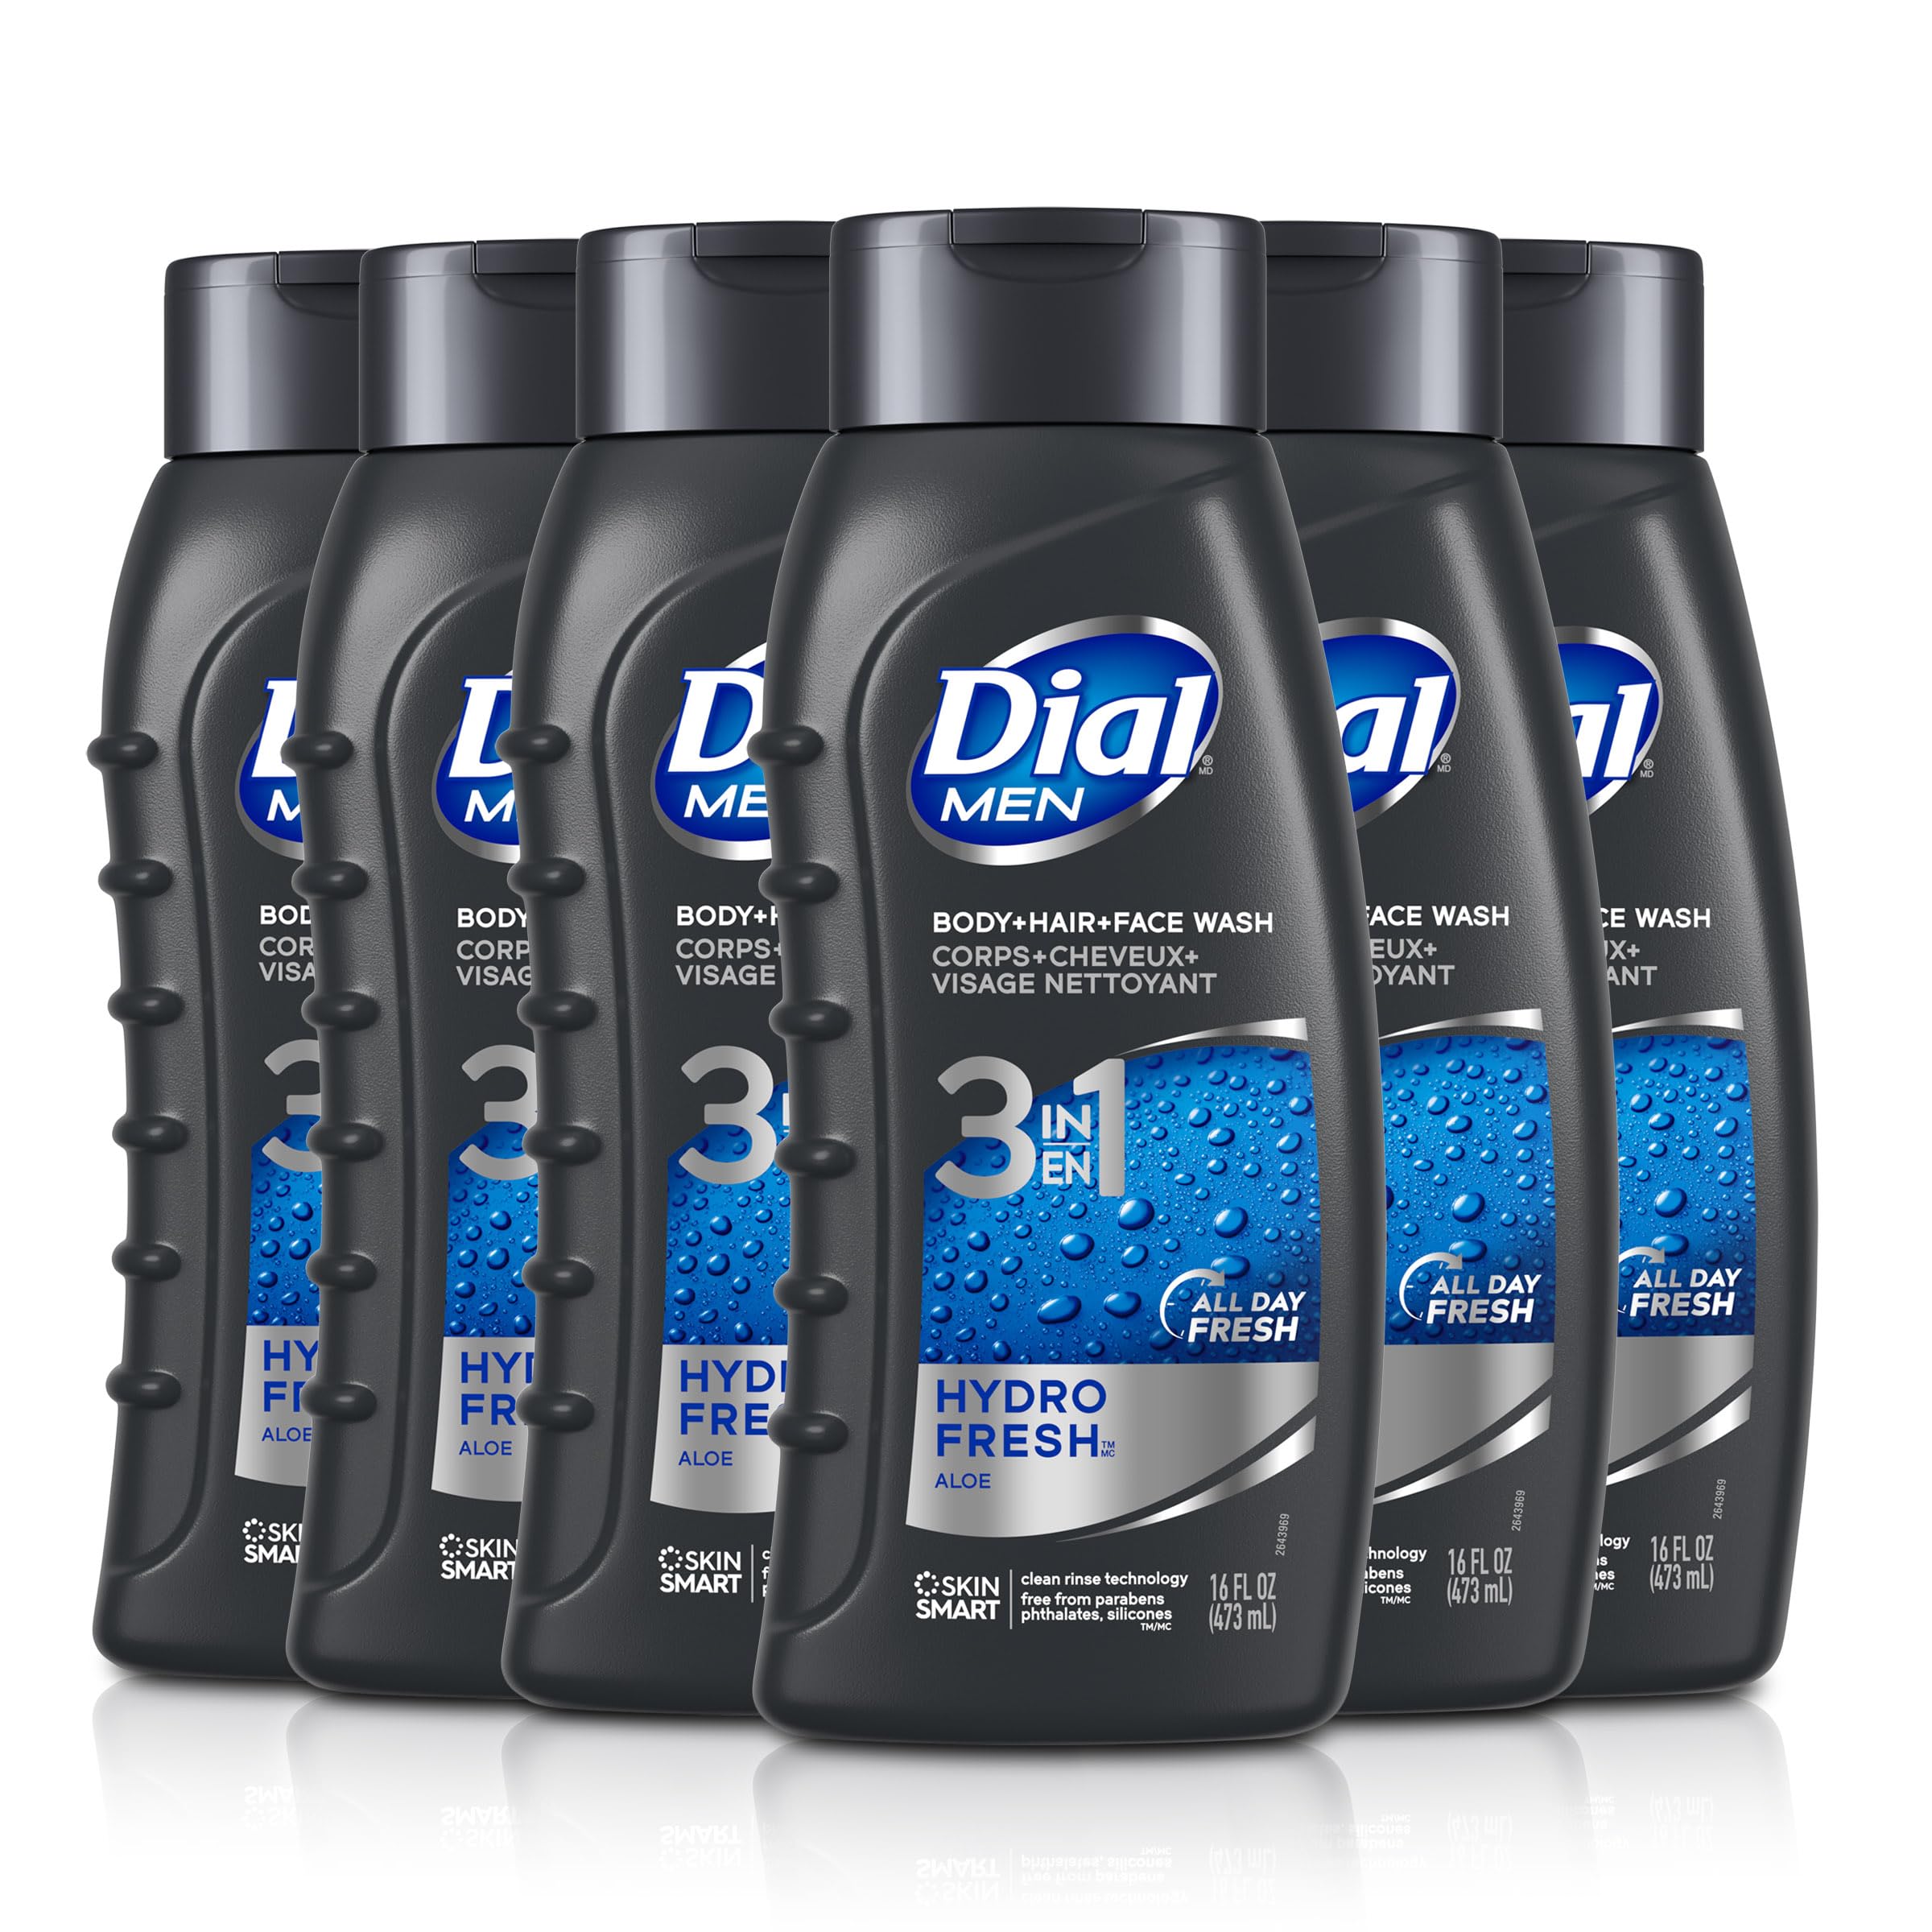 Dial Men 3in1 Body, Hair and Face Wash, Hydro Fresh, 16 fl oz, Pack of 6